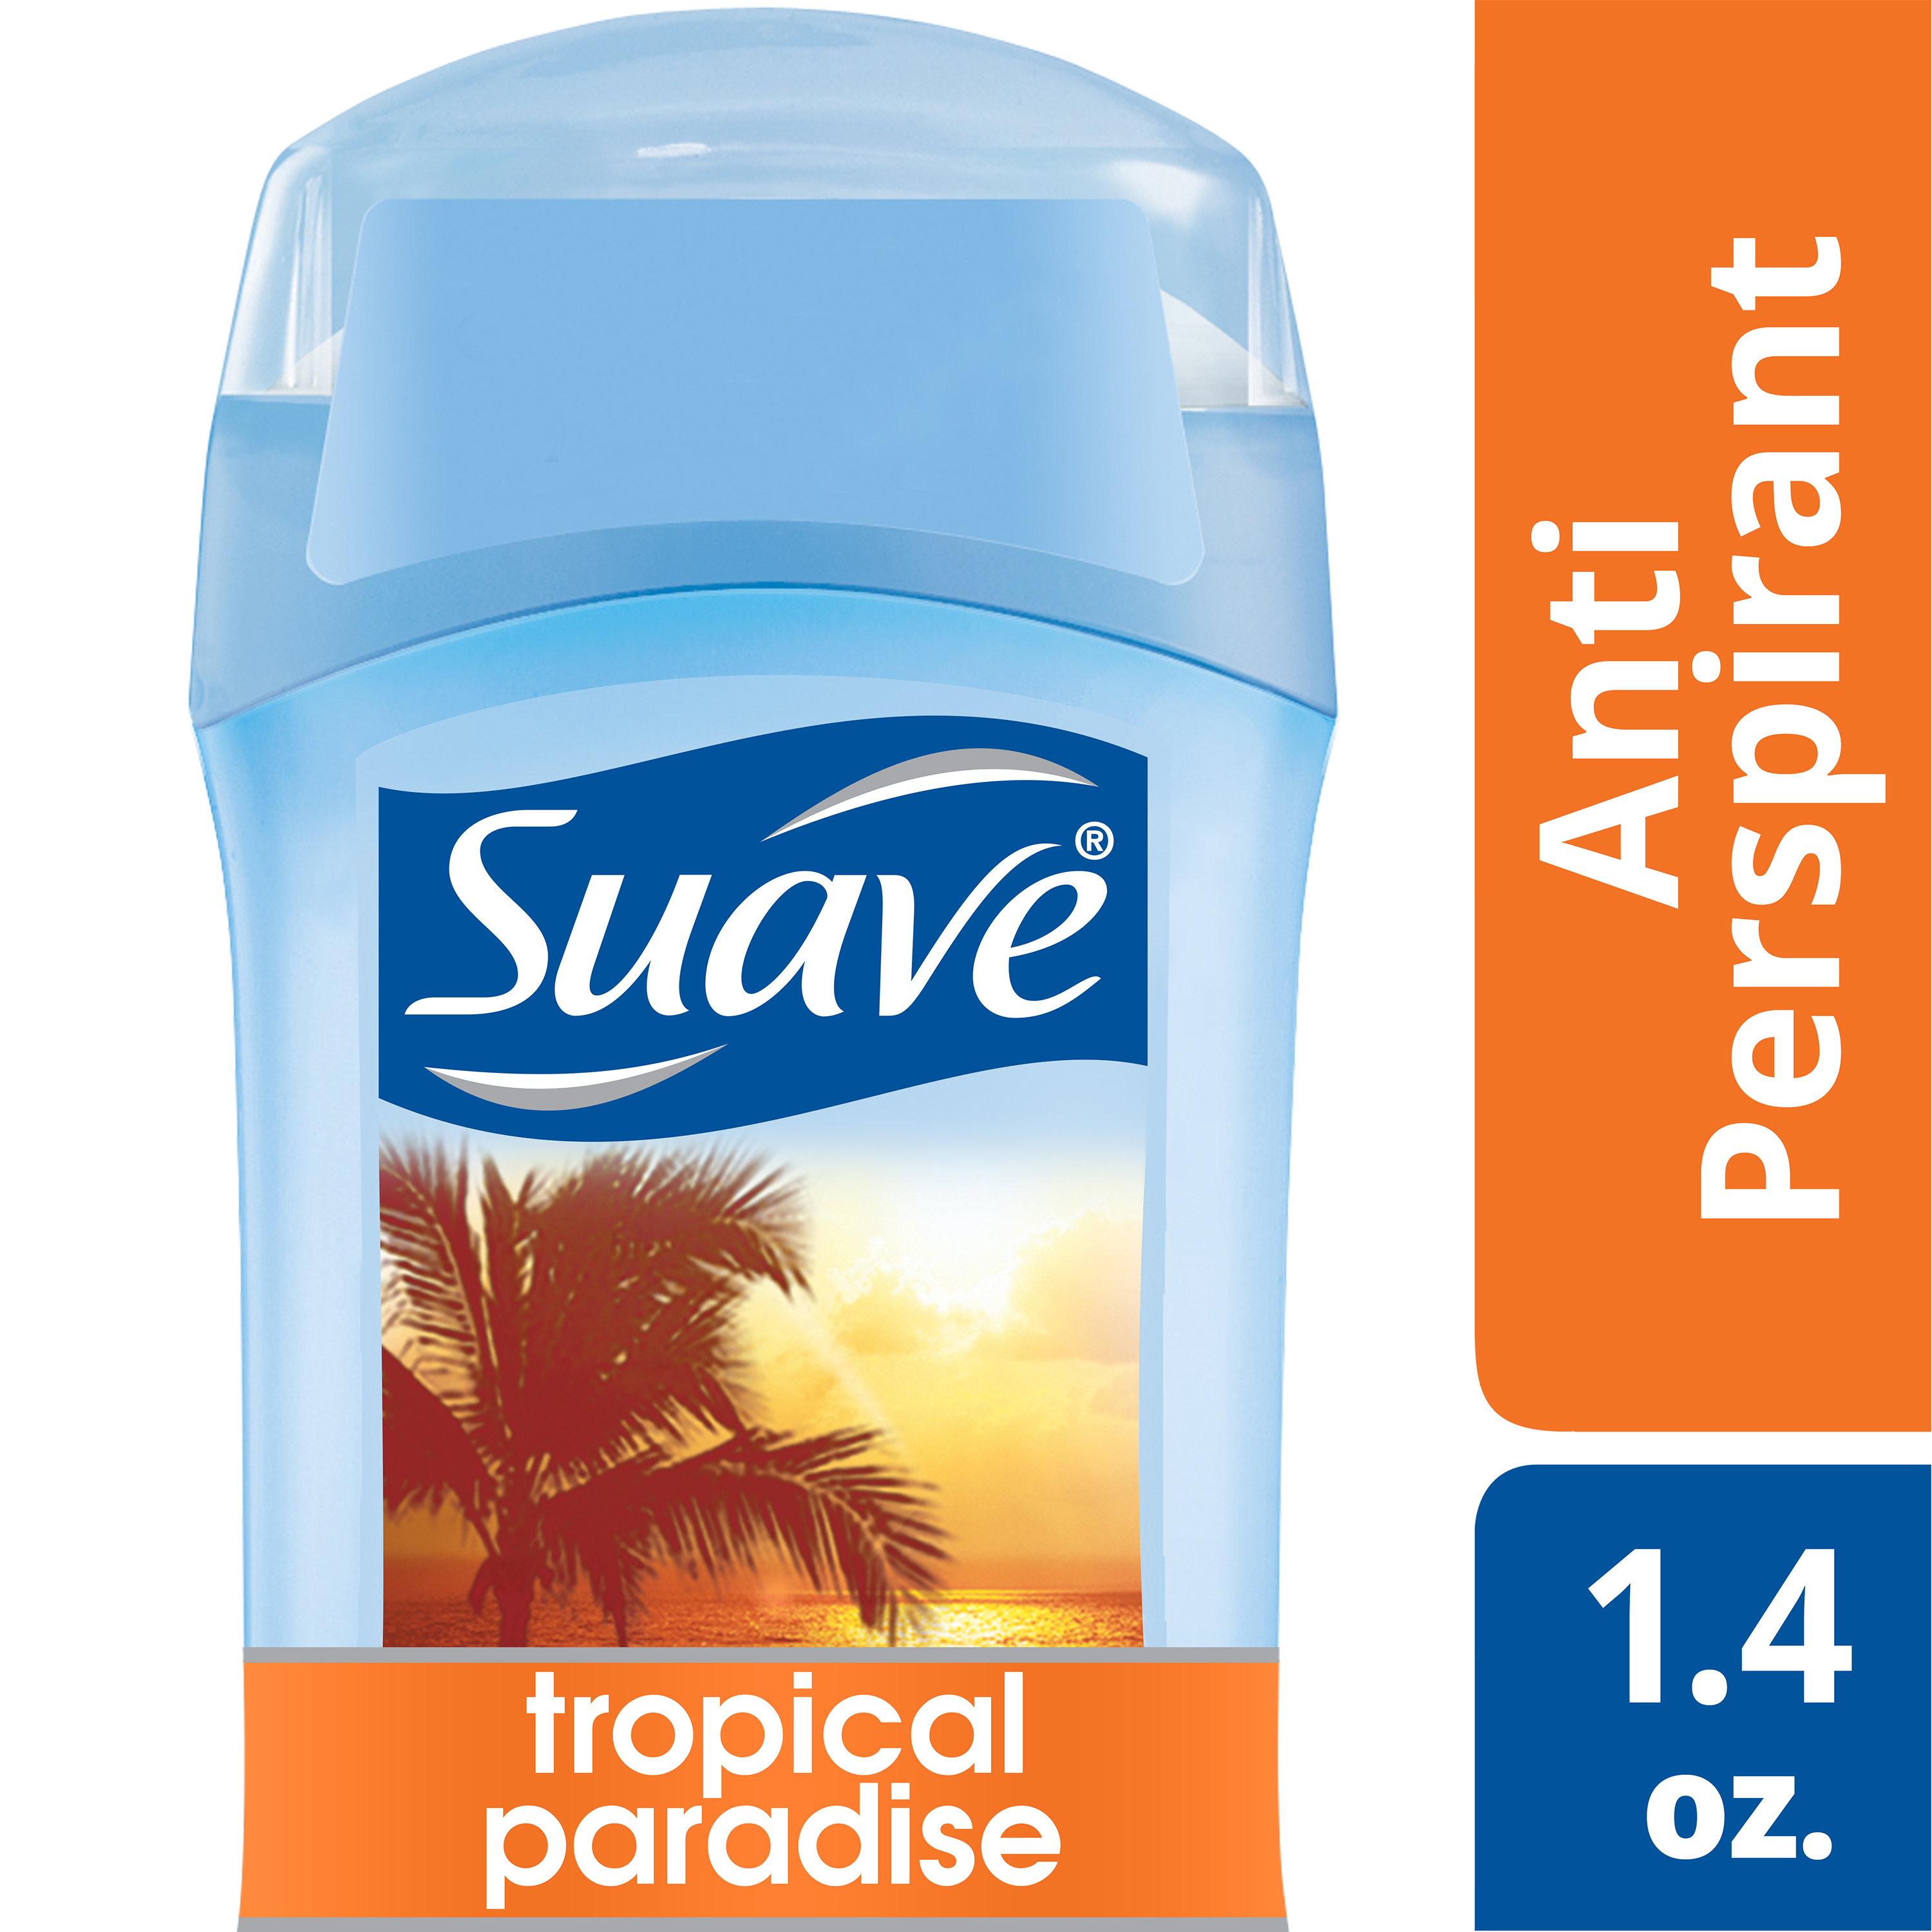 Suave 24 Hour Protection Anti-Perspirant Deodorant Invisible Solid, Tropical Paradise 1.40 oz - image 4 of 7